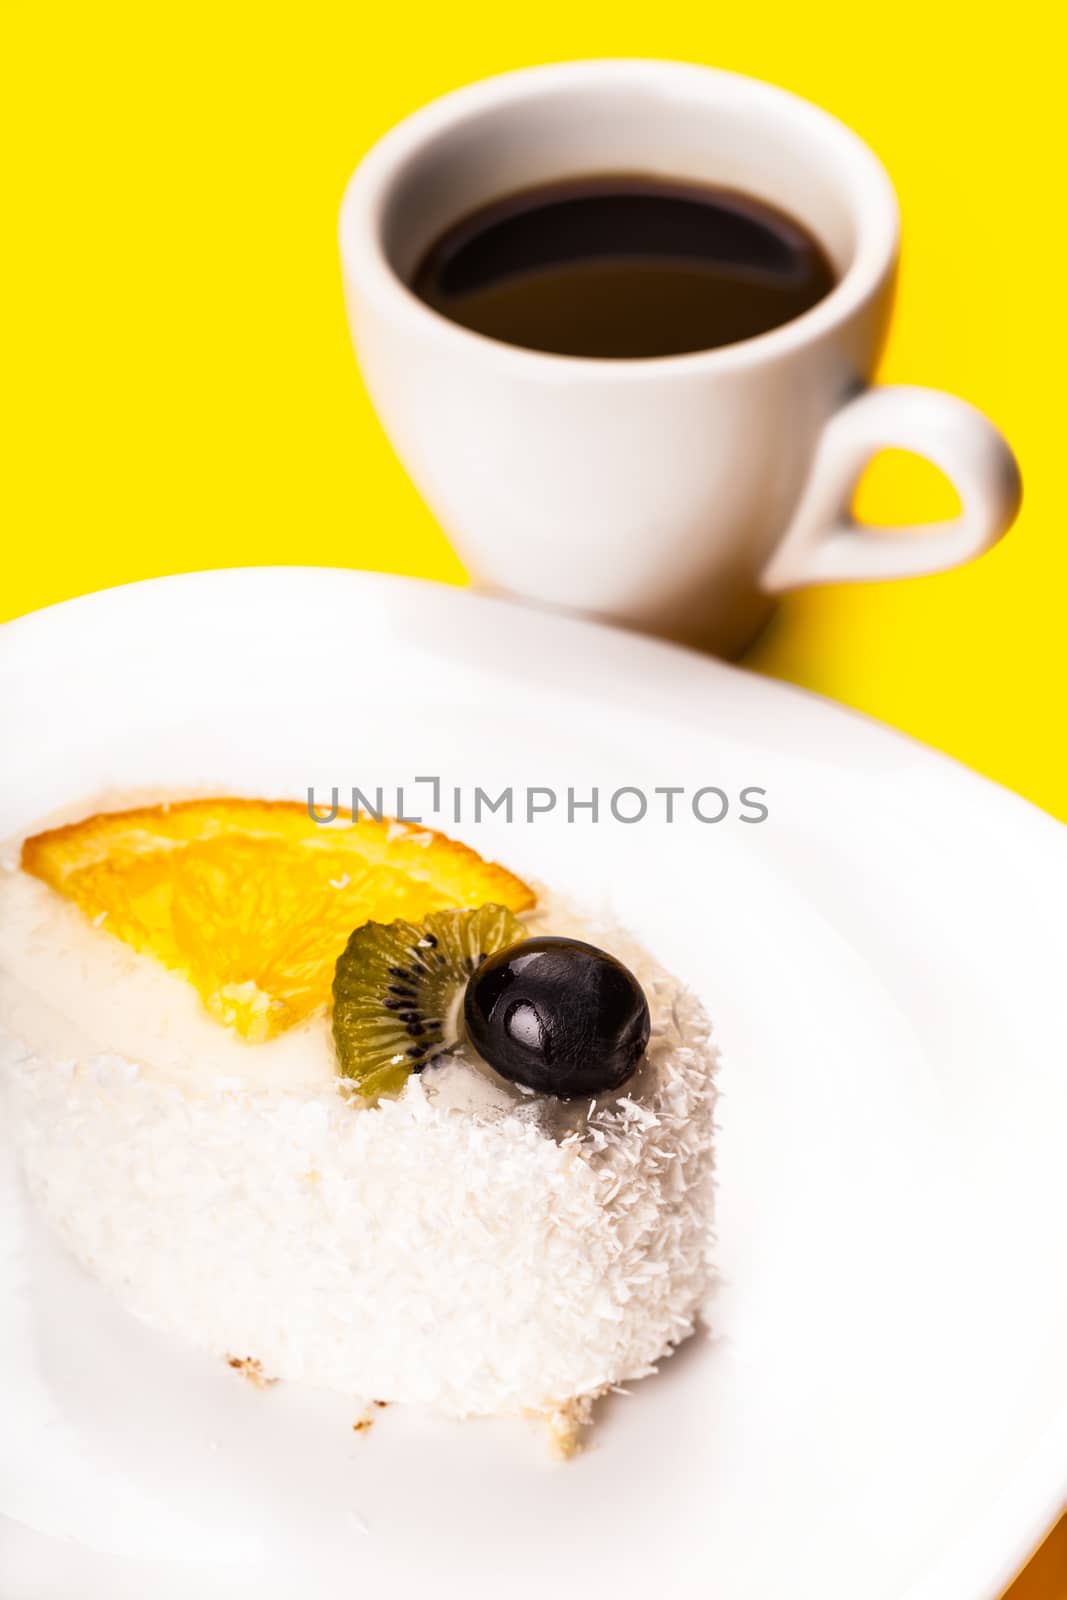 coconut piece of cake and coffee cup on a yellow background